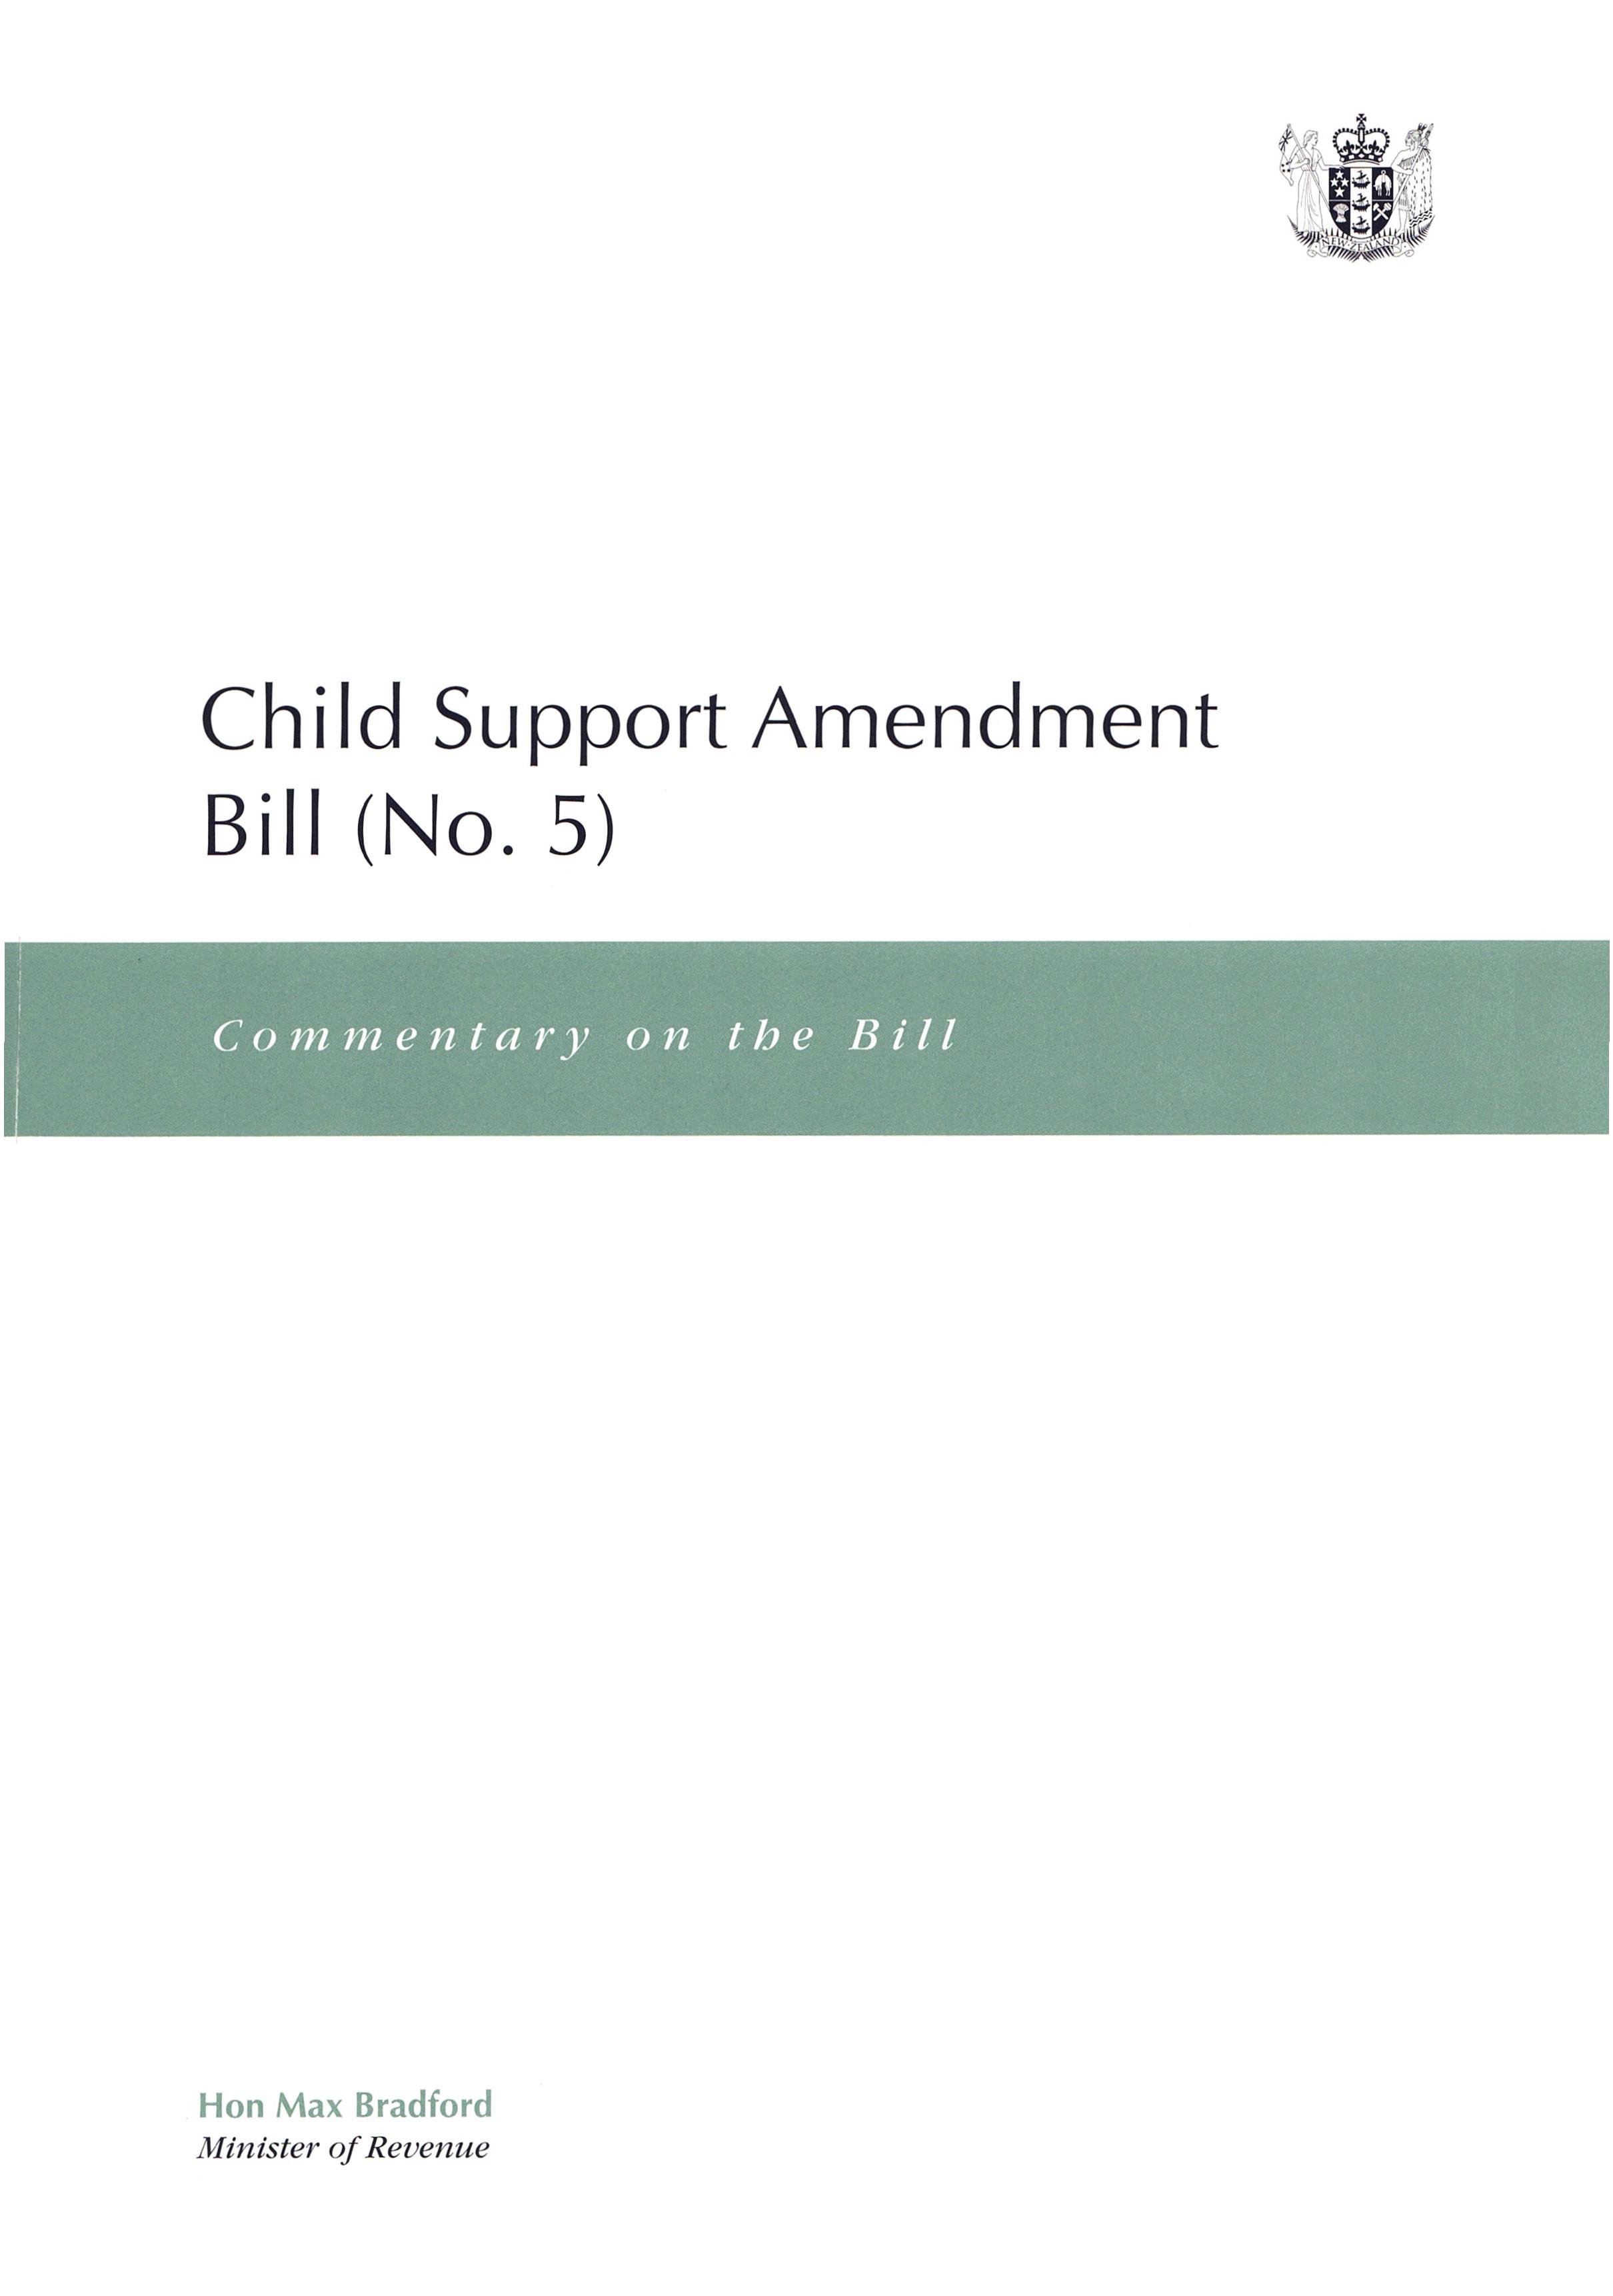 Publication cover image. Title = Child Support Amendment Bill (No. 5) - Commentary on the Bill. November 1998.